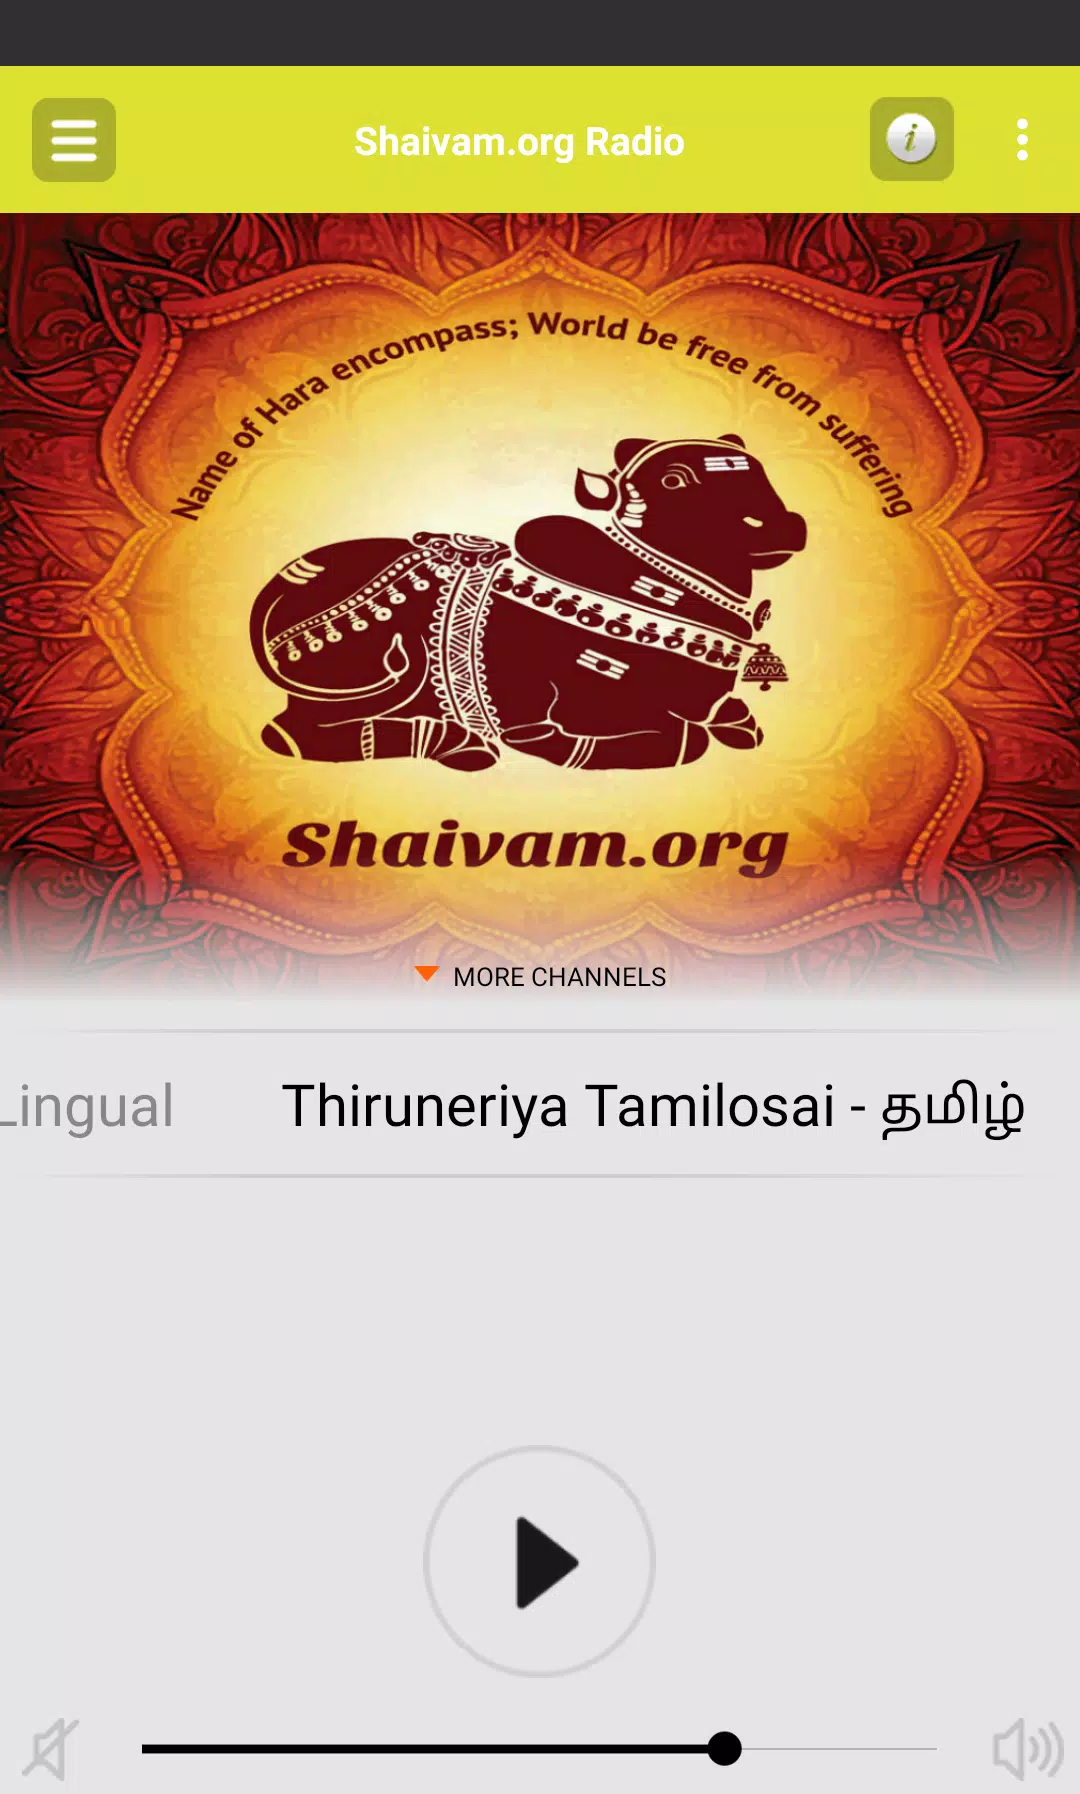 Shaivam.org Radio for Android - APK Download